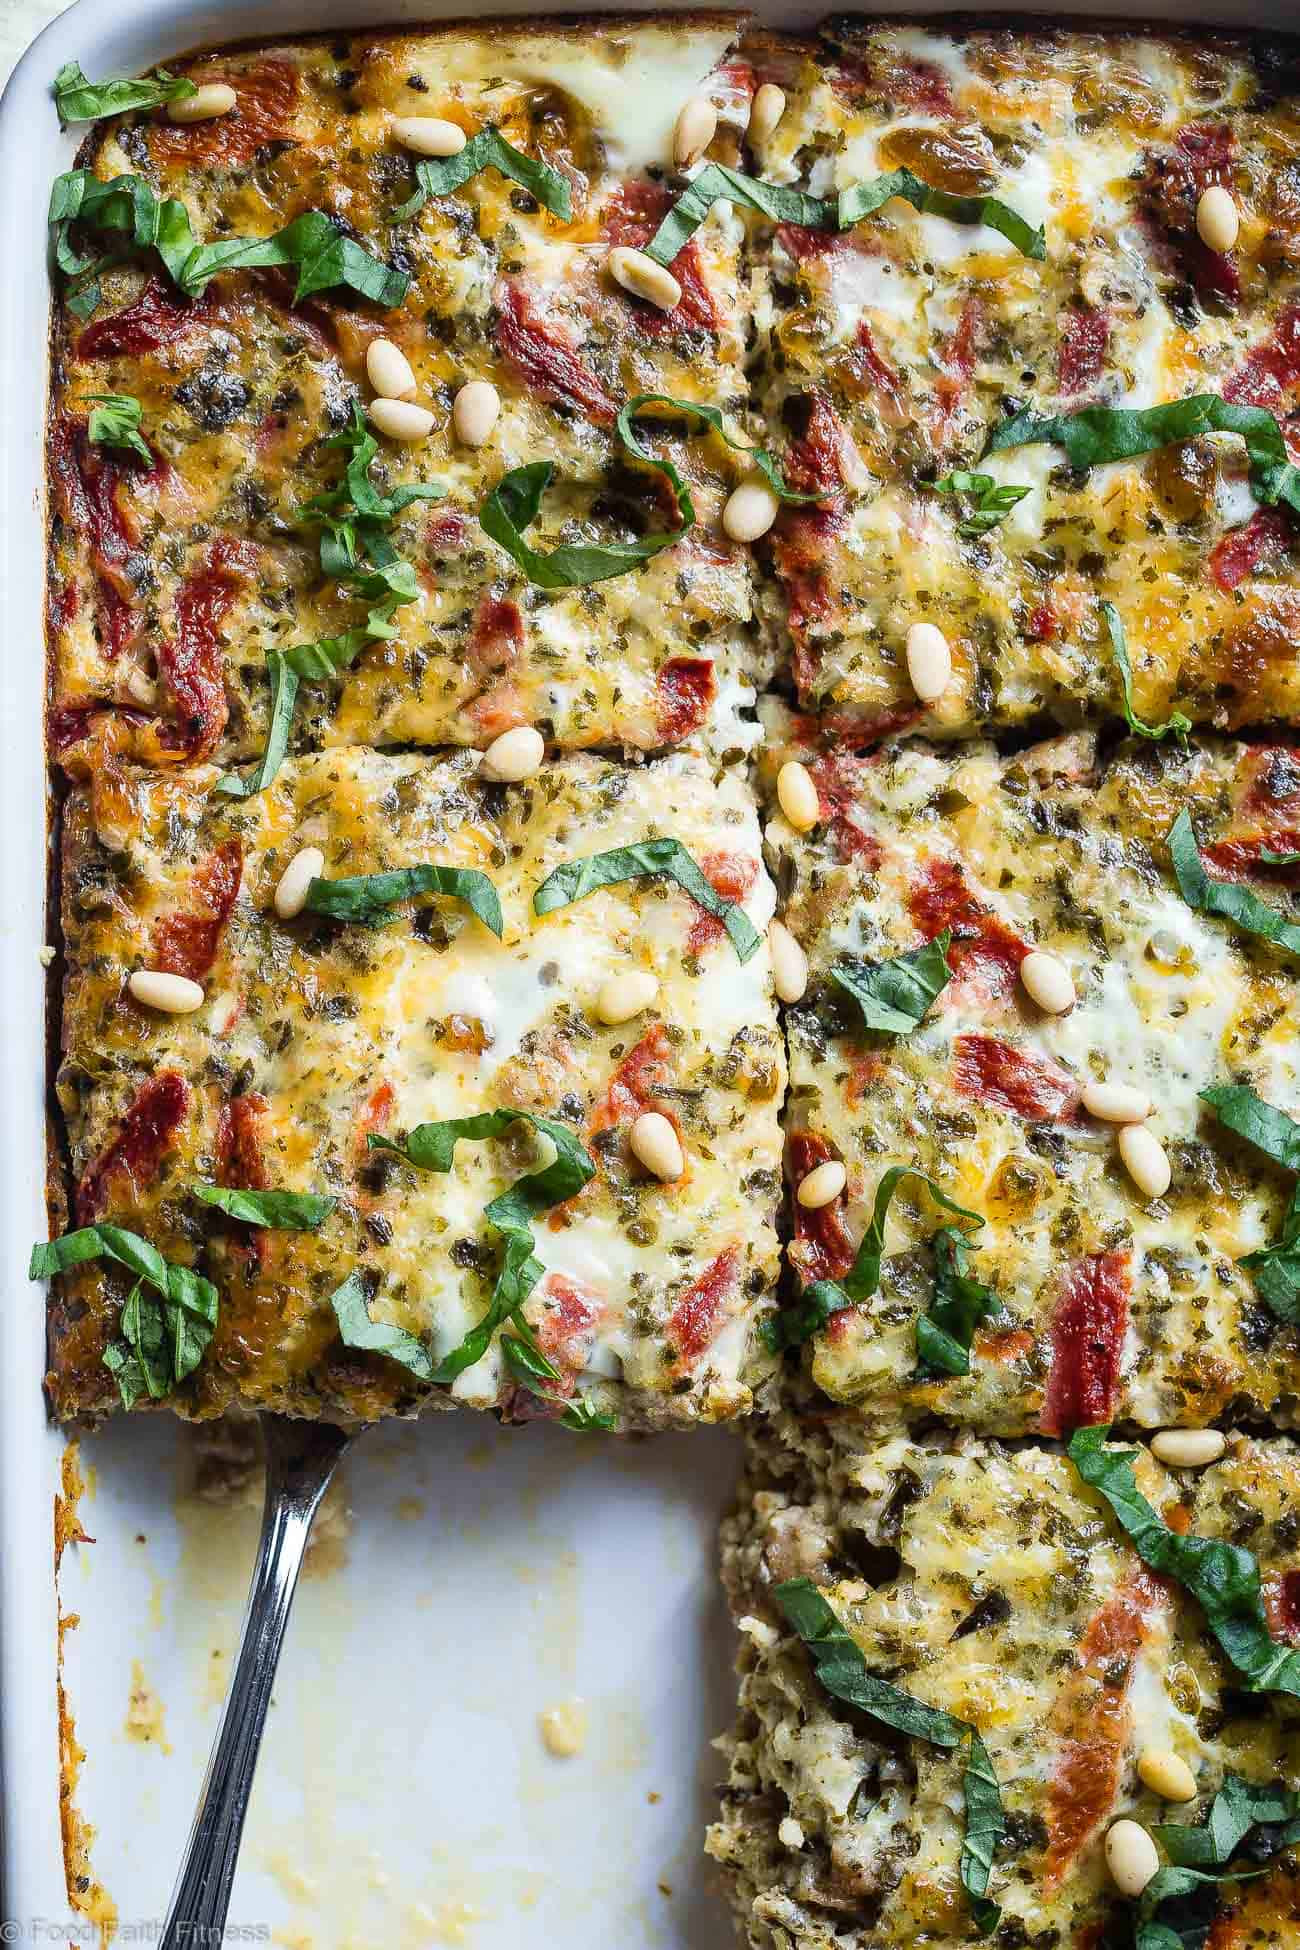 Low Carb Keto Breakfast
 Easy Low Carb Keto Breakfast Casserole with Sausage